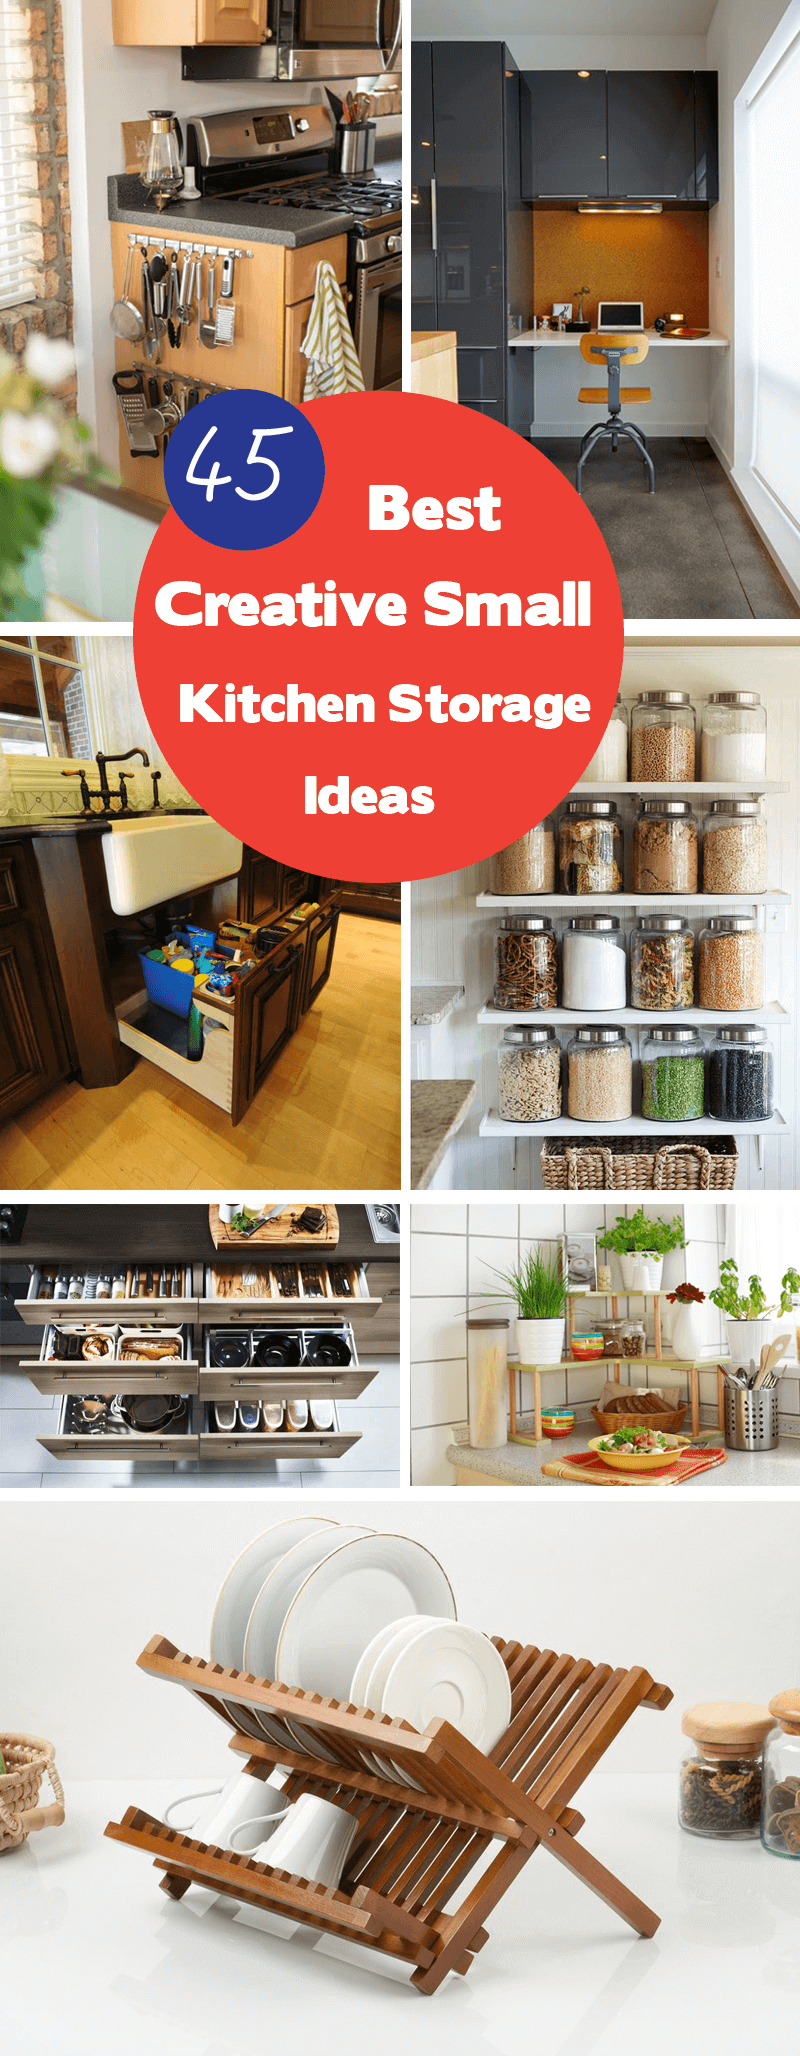 45 Creative Small Kitchen Storage Ideas To Maximize Your Space Interiorsherpa